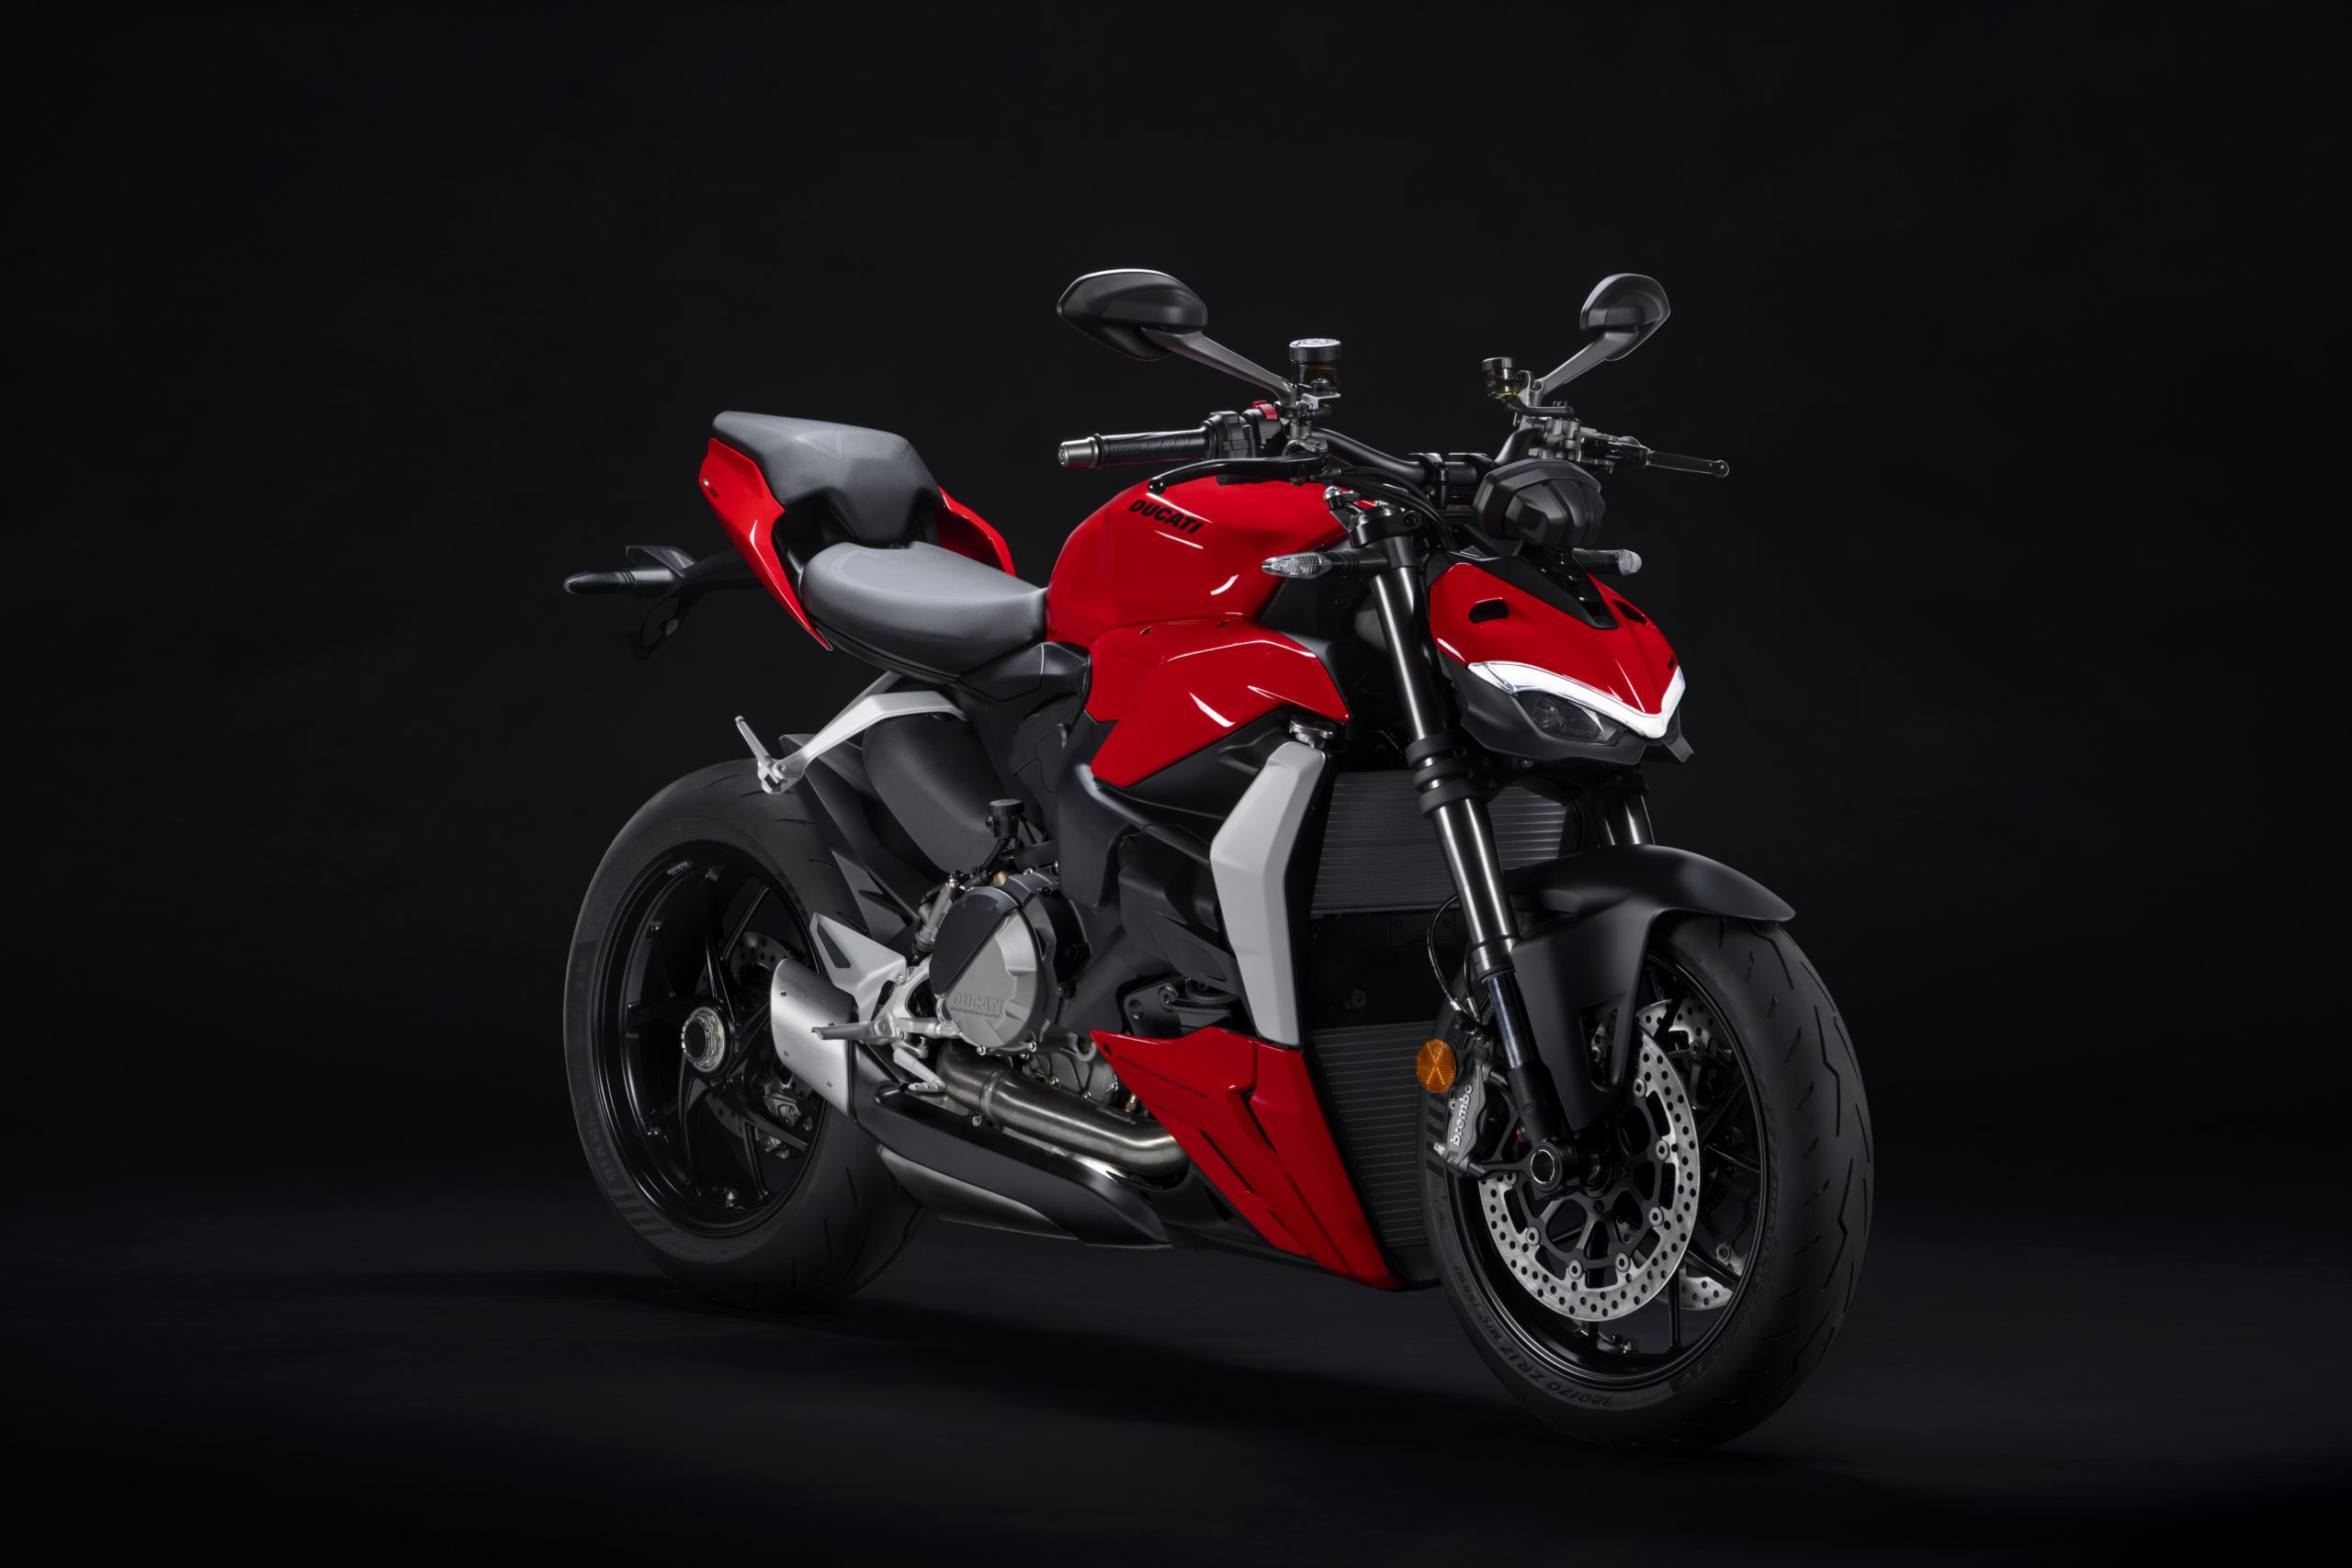 A view of the all-new 2022 Ducati Streetfighter V2, available in Ducati dealerships as of December